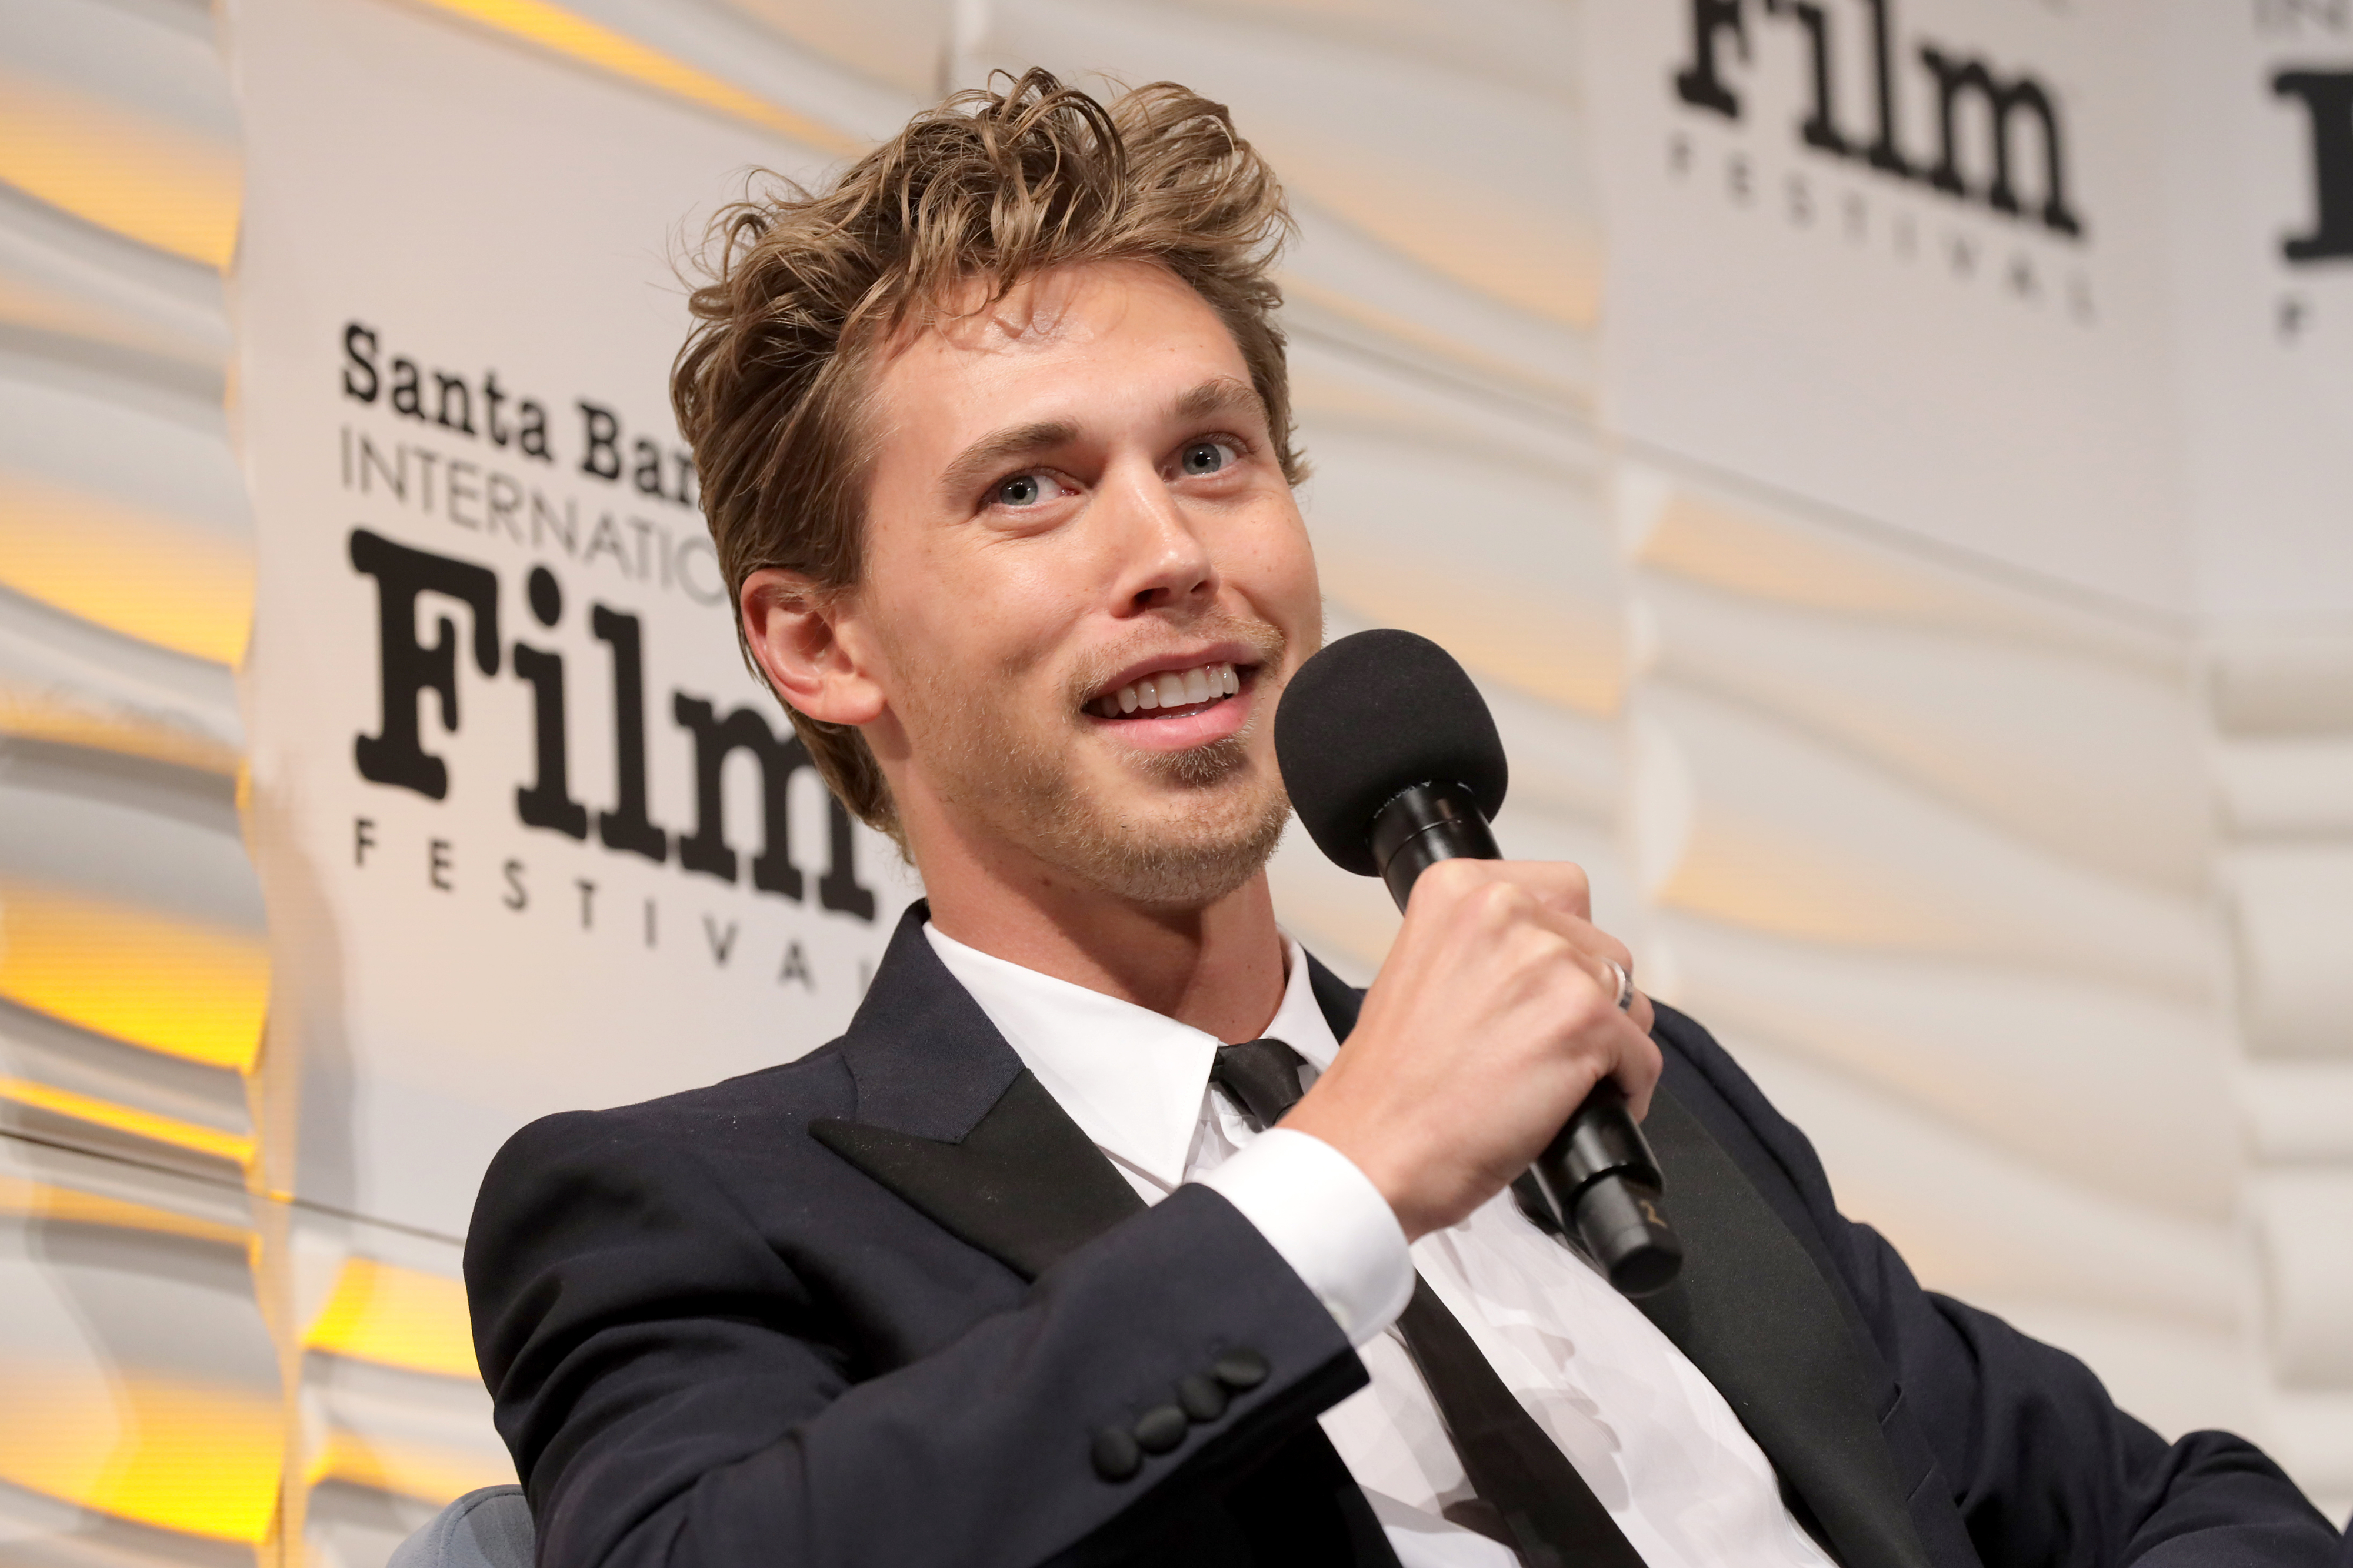 Close-up of Austin sitting onstage in a suit and tie at a media event